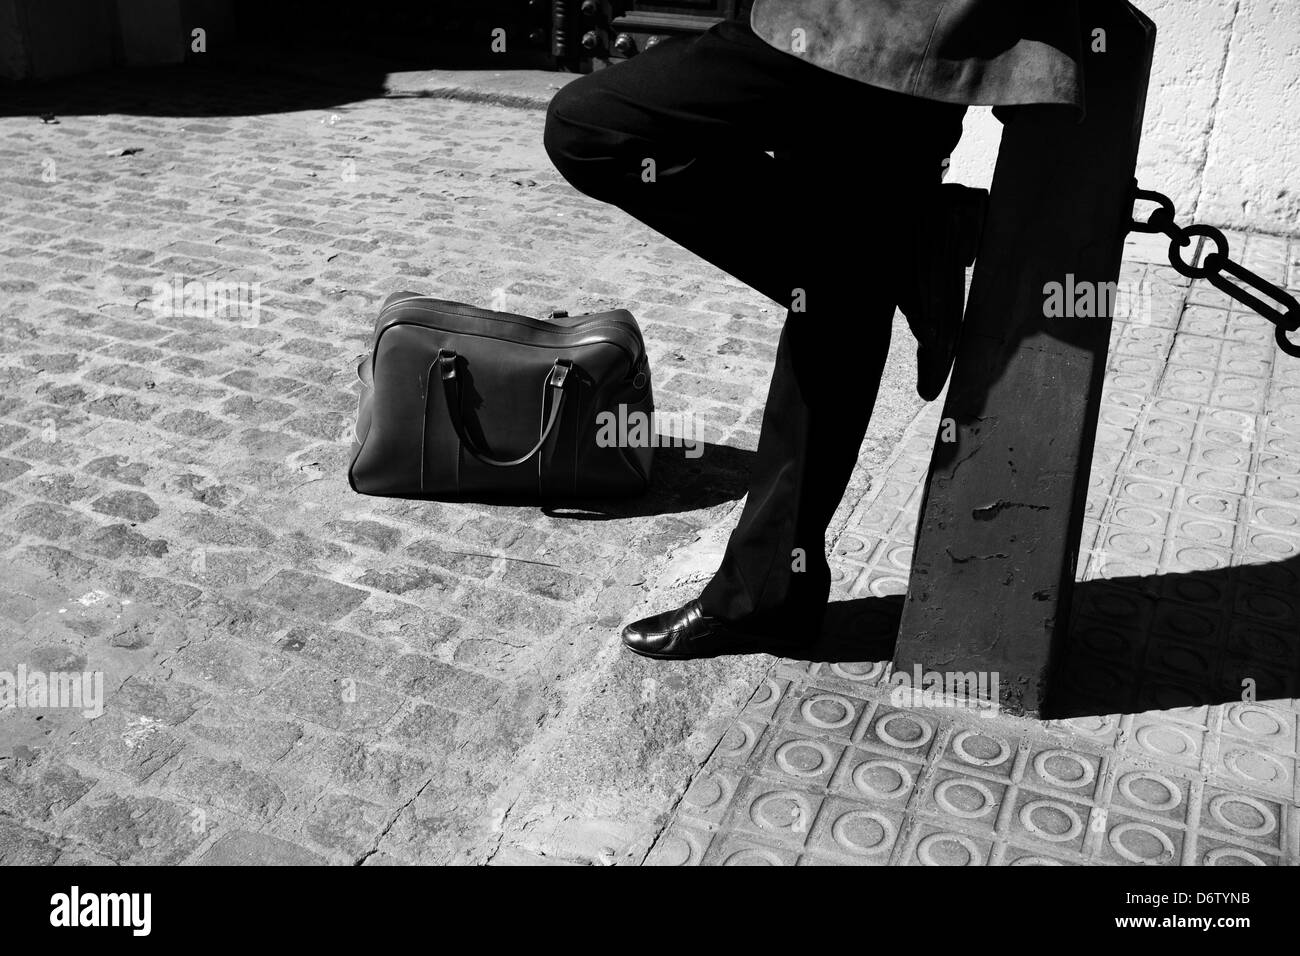 A man waits with suitcase before leaving town. Stock Photo